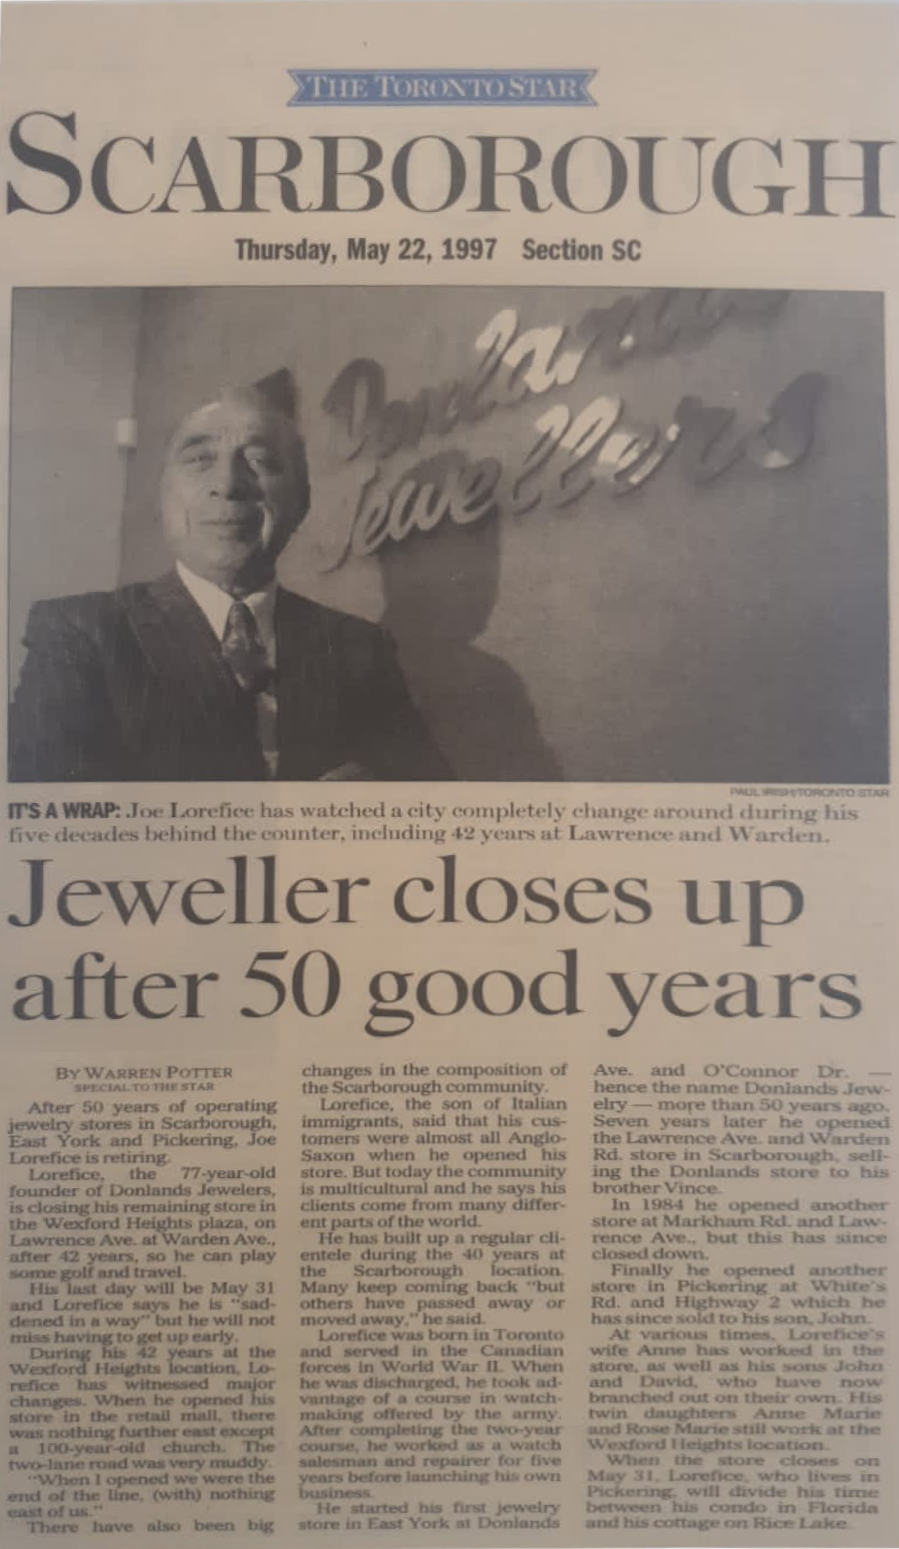 Jewellers closes up after 50 good years - Custom Jewellers by Gianni